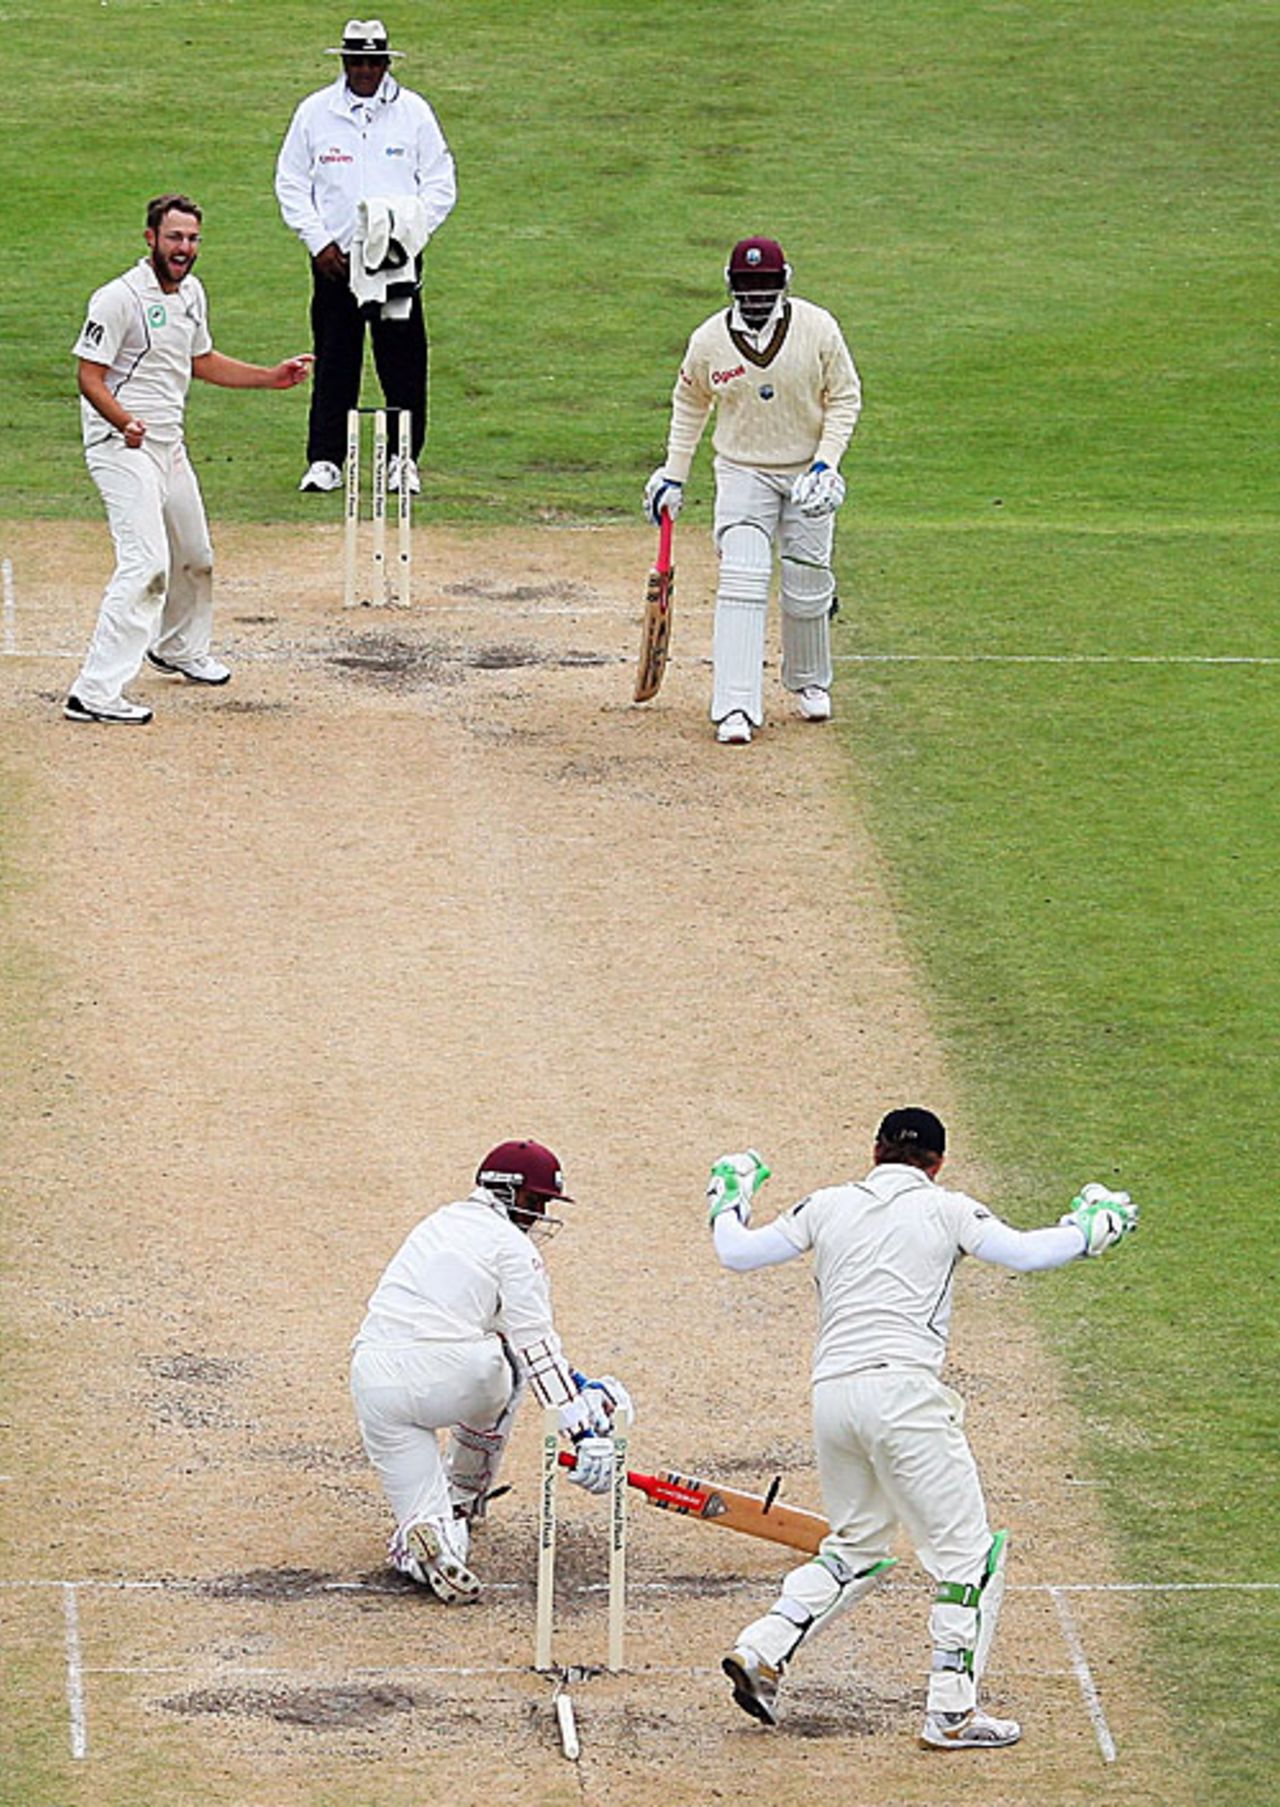 Shivnarine Chanderpaul loses his middle stump to Daniel Vettori, New Zealand v West Indies, 1st Test, Dunedin, 4th day, December 14, 2008